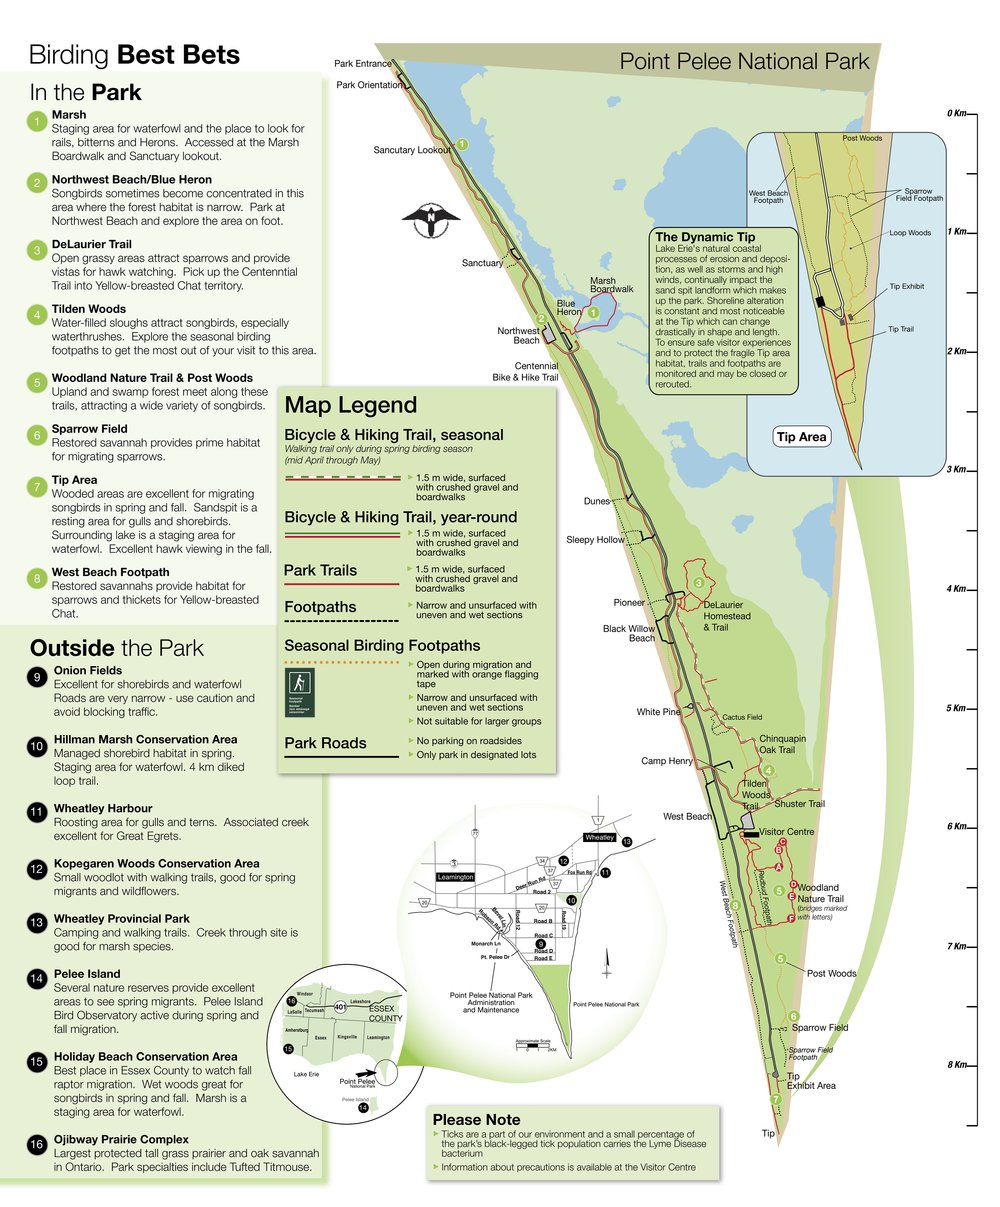 Point Pelee Park Map - Birding Hotspots and Trails